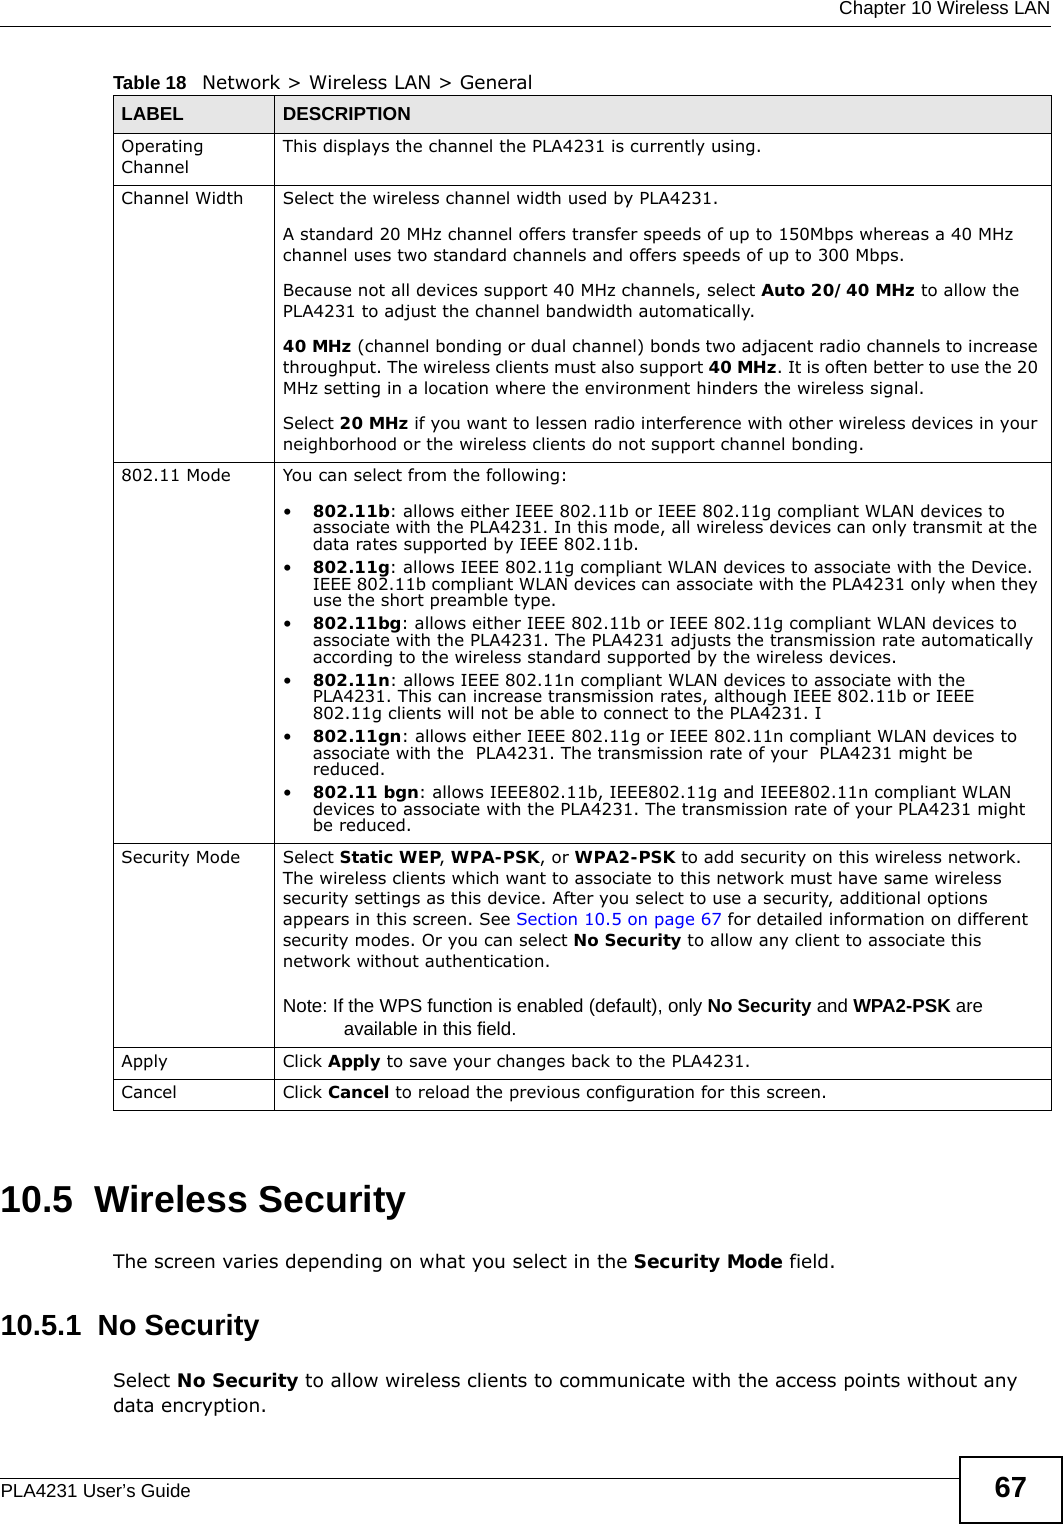  Chapter 10 Wireless LANPLA4231 User’s Guide 6710.5  Wireless SecurityThe screen varies depending on what you select in the Security Mode field.10.5.1  No SecuritySelect No Security to allow wireless clients to communicate with the access points without any data encryption.Operating Channel This displays the channel the PLA4231 is currently using.Channel Width Select the wireless channel width used by PLA4231.A standard 20 MHz channel offers transfer speeds of up to 150Mbps whereas a 40 MHz channel uses two standard channels and offers speeds of up to 300 Mbps. Because not all devices support 40 MHz channels, select Auto 20/40 MHz to allow the PLA4231 to adjust the channel bandwidth automatically.40 MHz (channel bonding or dual channel) bonds two adjacent radio channels to increase throughput. The wireless clients must also support 40 MHz. It is often better to use the 20 MHz setting in a location where the environment hinders the wireless signal. Select 20 MHz if you want to lessen radio interference with other wireless devices in your neighborhood or the wireless clients do not support channel bonding.802.11 Mode You can select from the following:•802.11b: allows either IEEE 802.11b or IEEE 802.11g compliant WLAN devices to associate with the PLA4231. In this mode, all wireless devices can only transmit at the data rates supported by IEEE 802.11b.•802.11g: allows IEEE 802.11g compliant WLAN devices to associate with the Device. IEEE 802.11b compliant WLAN devices can associate with the PLA4231 only when they use the short preamble type.•802.11bg: allows either IEEE 802.11b or IEEE 802.11g compliant WLAN devices to associate with the PLA4231. The PLA4231 adjusts the transmission rate automatically according to the wireless standard supported by the wireless devices.•802.11n: allows IEEE 802.11n compliant WLAN devices to associate with the PLA4231. This can increase transmission rates, although IEEE 802.11b or IEEE 802.11g clients will not be able to connect to the PLA4231. I•802.11gn: allows either IEEE 802.11g or IEEE 802.11n compliant WLAN devices to associate with the  PLA4231. The transmission rate of your  PLA4231 might be reduced.•802.11 bgn: allows IEEE802.11b, IEEE802.11g and IEEE802.11n compliant WLAN devices to associate with the PLA4231. The transmission rate of your PLA4231 might be reduced.Security Mode Select Static WEP, WPA-PSK, or WPA2-PSK to add security on this wireless network. The wireless clients which want to associate to this network must have same wireless security settings as this device. After you select to use a security, additional options appears in this screen. See Section 10.5 on page 67 for detailed information on different security modes. Or you can select No Security to allow any client to associate this network without authentication.Note: If the WPS function is enabled (default), only No Security and WPA2-PSK are available in this field.Apply Click Apply to save your changes back to the PLA4231.Cancel Click Cancel to reload the previous configuration for this screen.Table 18   Network &gt; Wireless LAN &gt; GeneralLABEL DESCRIPTION